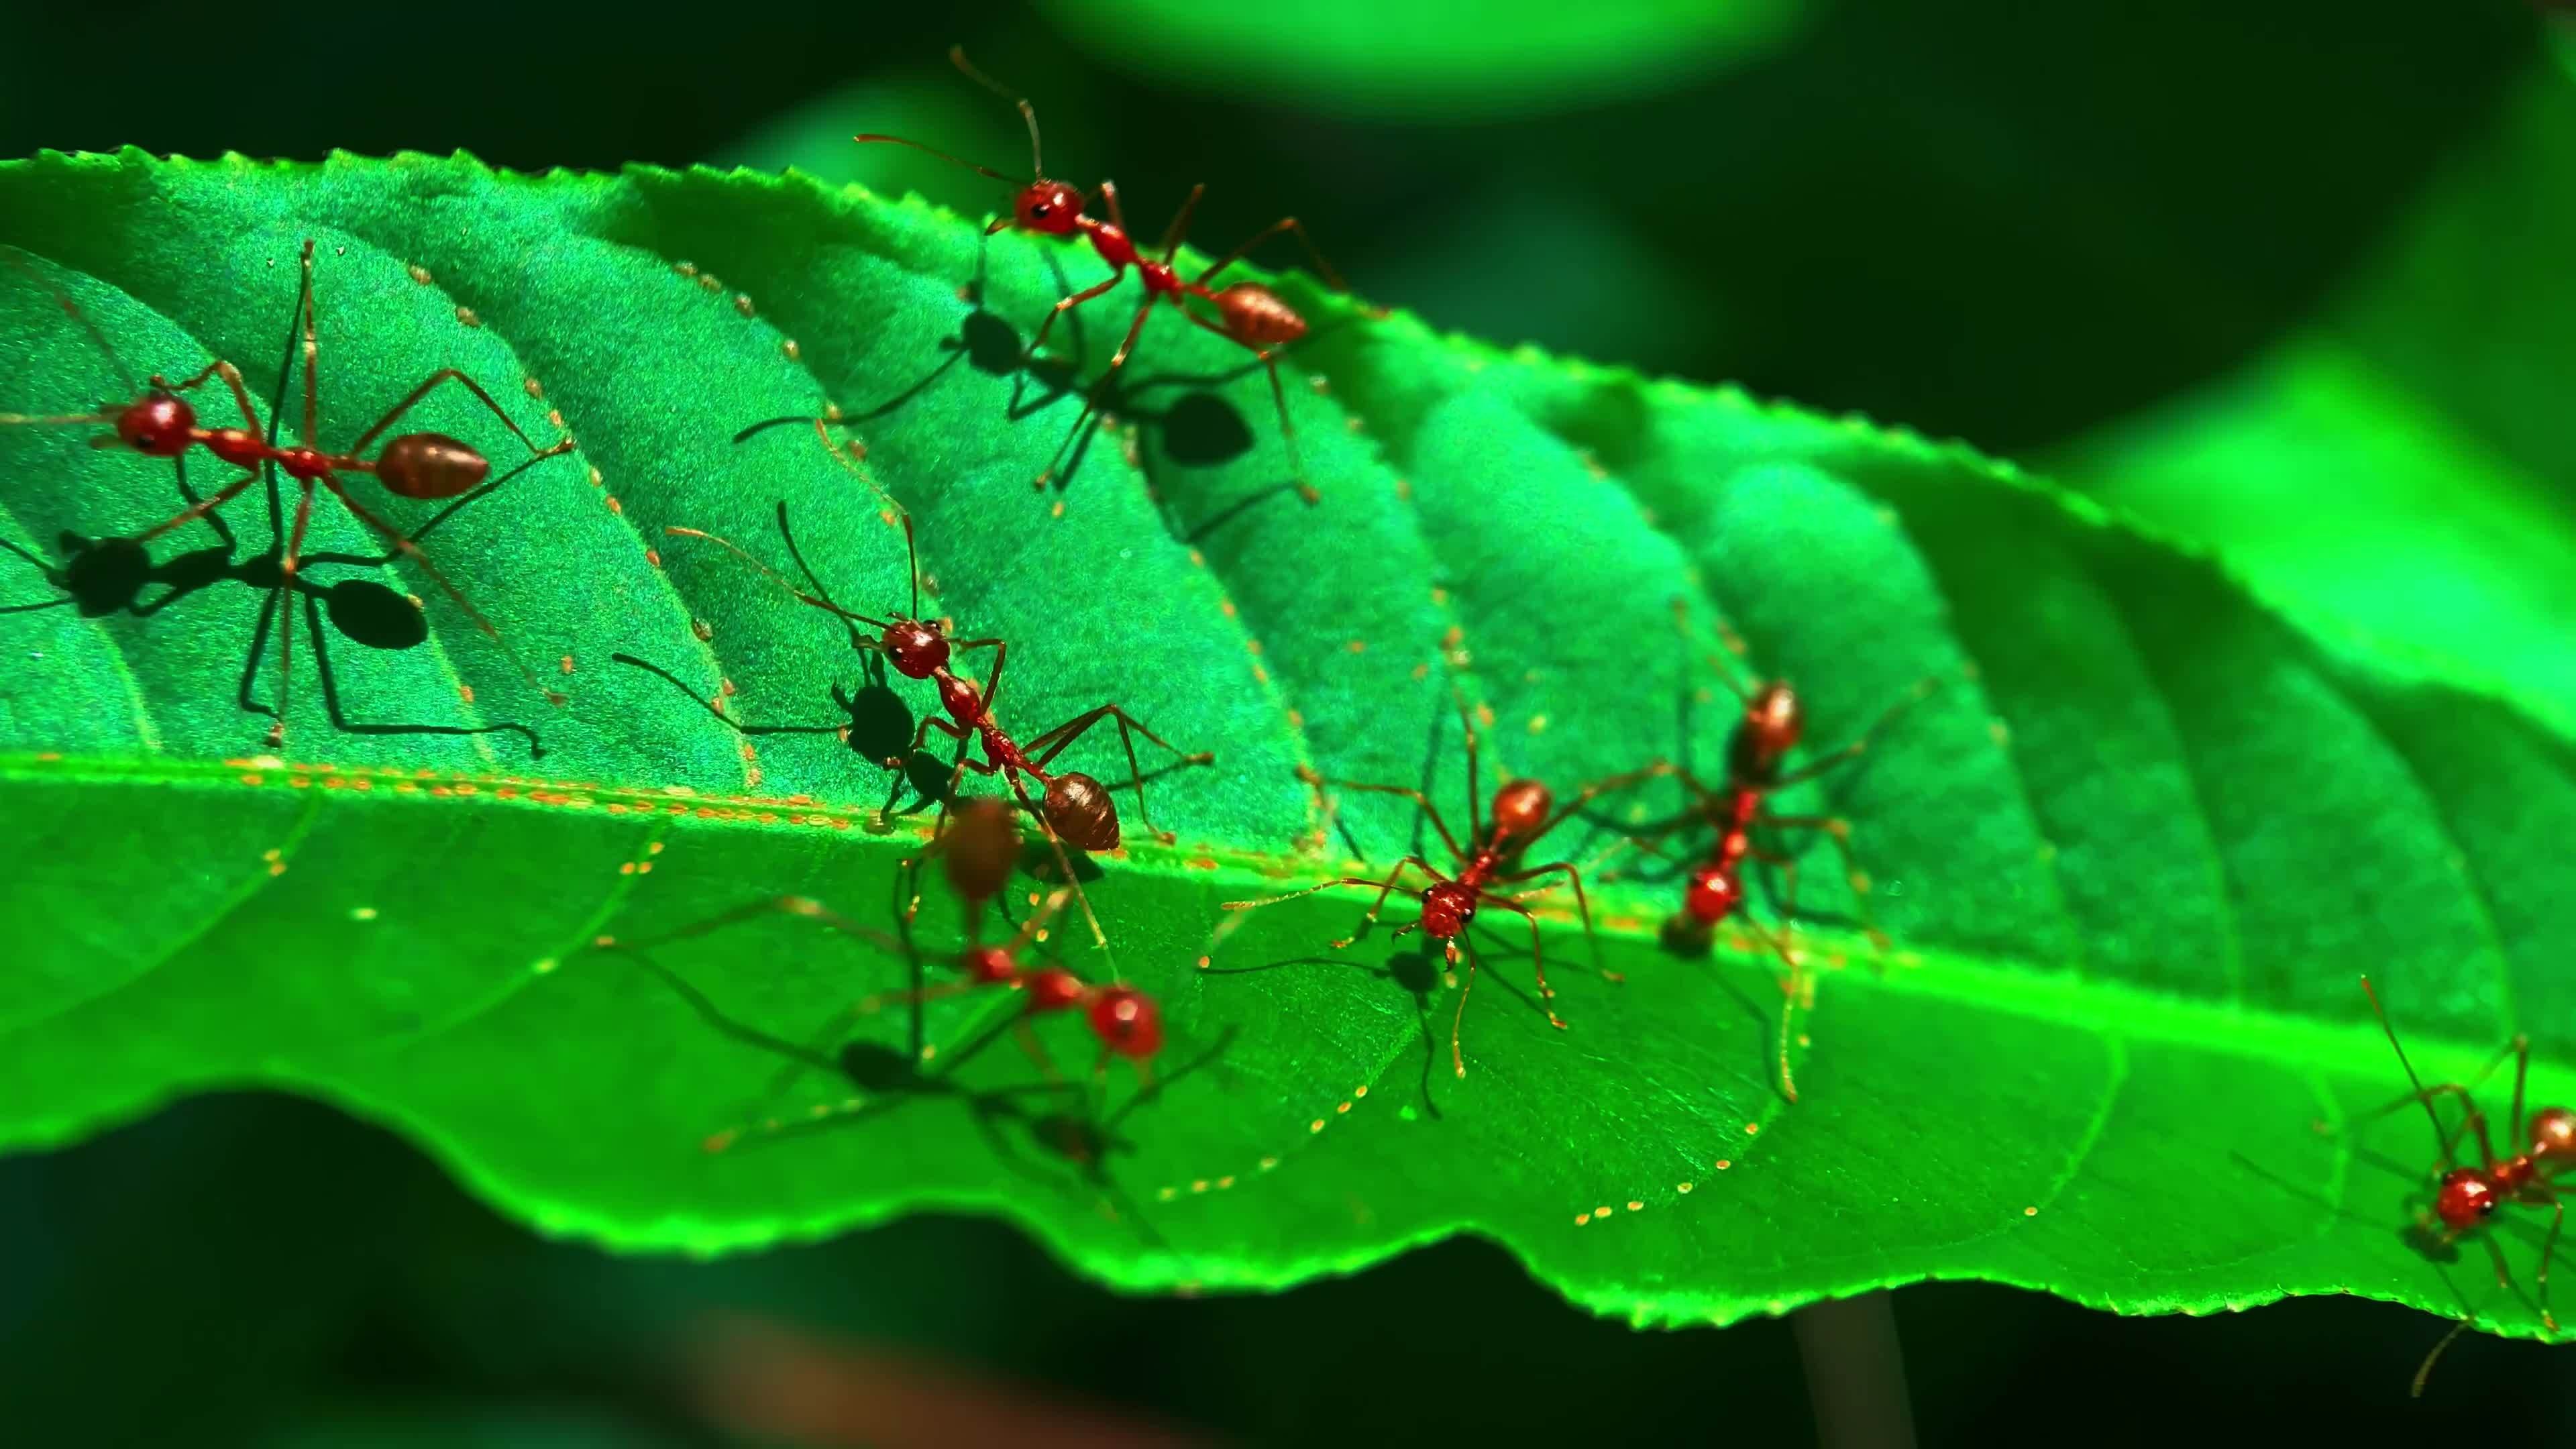 Free ant stock footage, High-quality videos, Fascinating insect world, Unique behavior, 3840x2160 4K Desktop